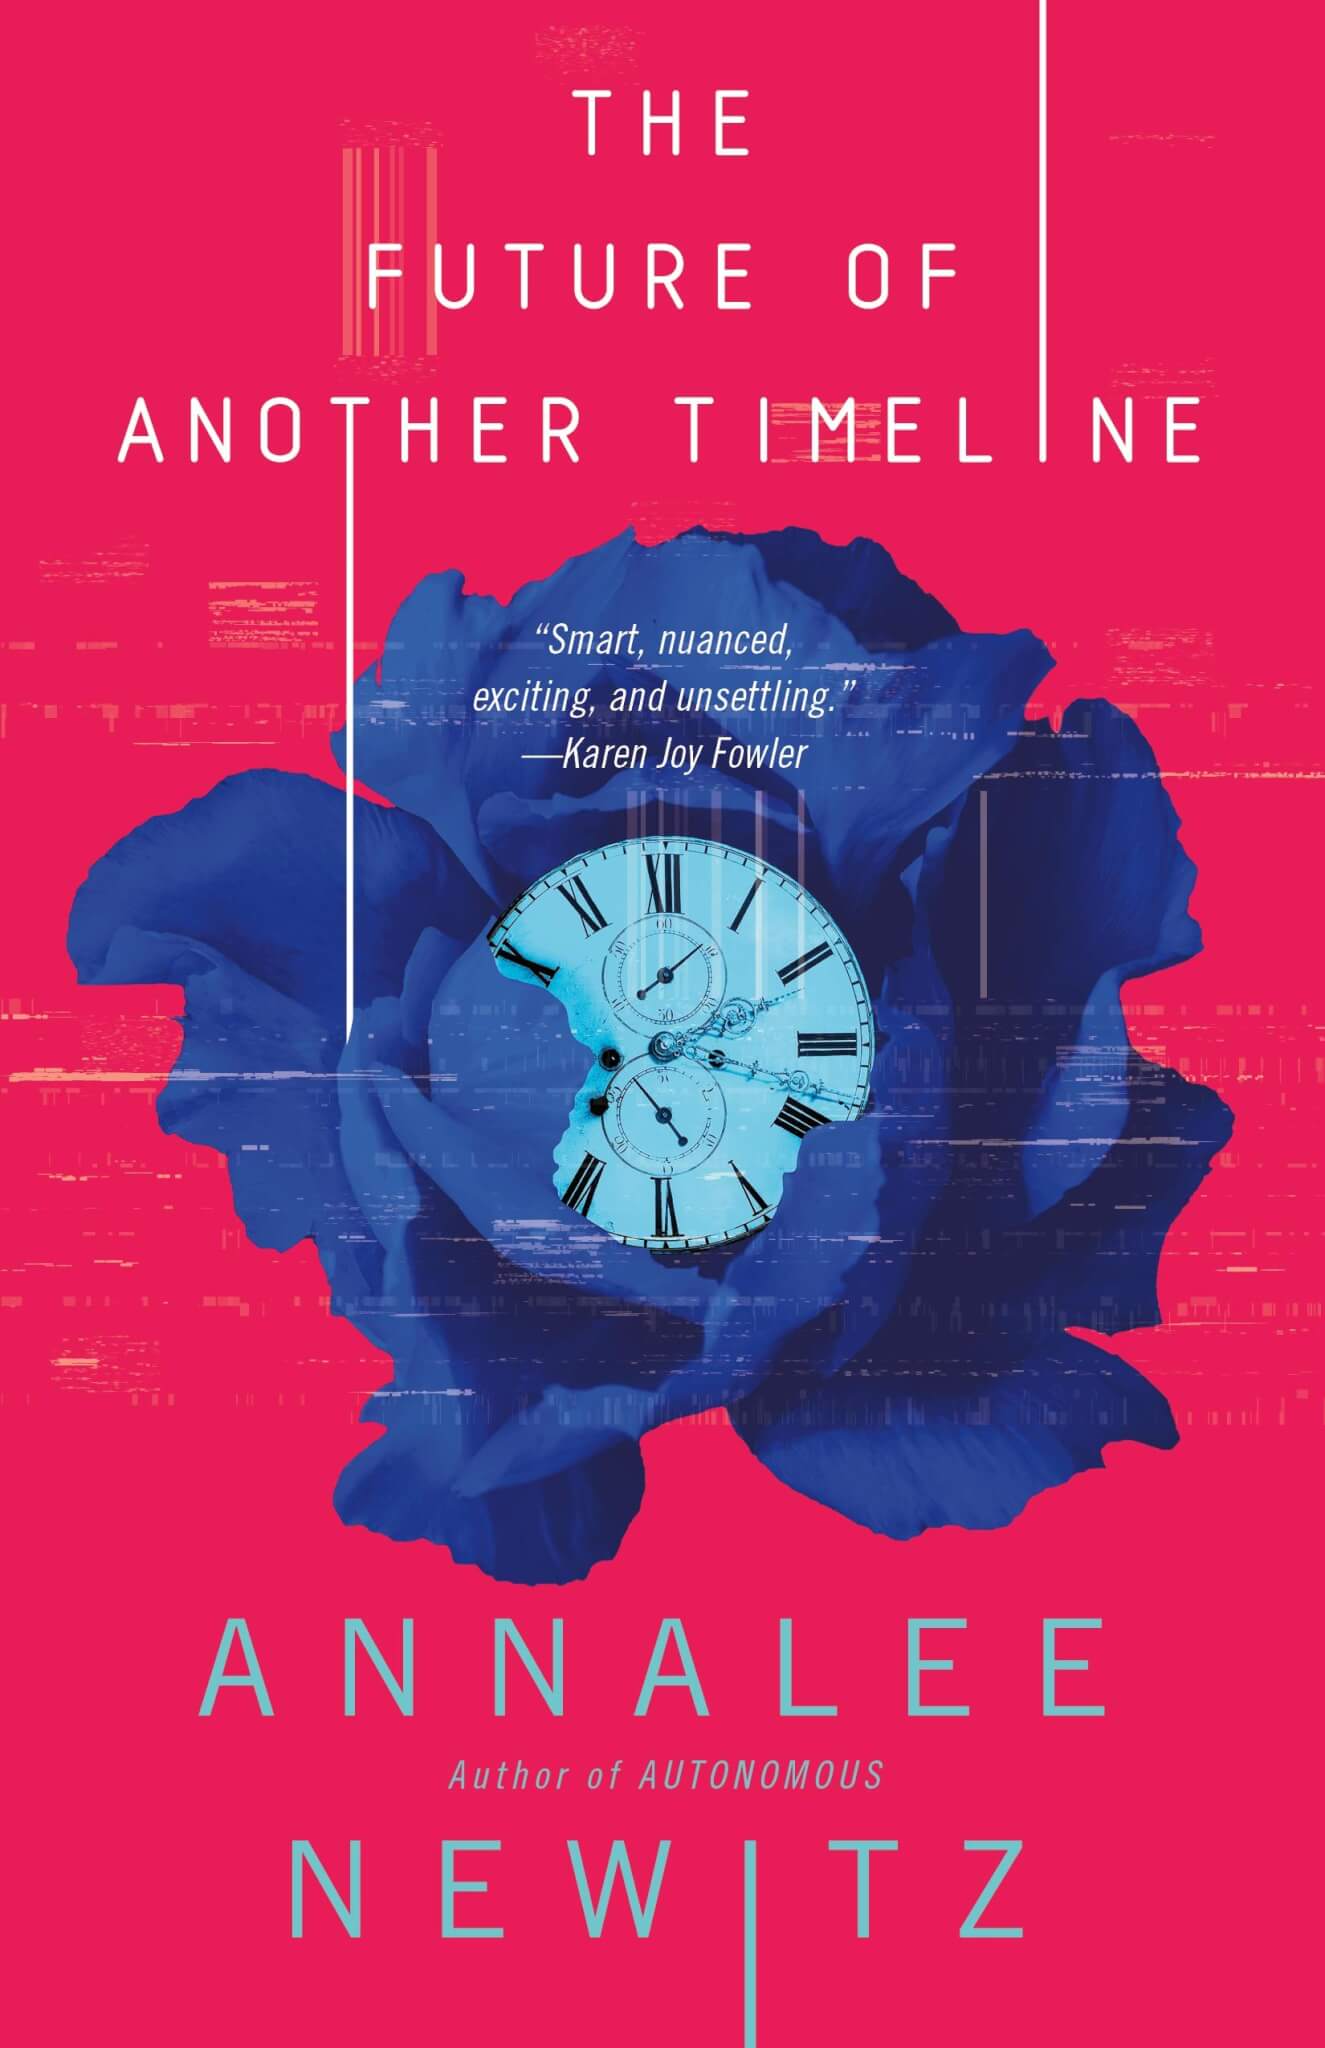 “The Future of Another Timeline” (2019) by Annalee Newitz